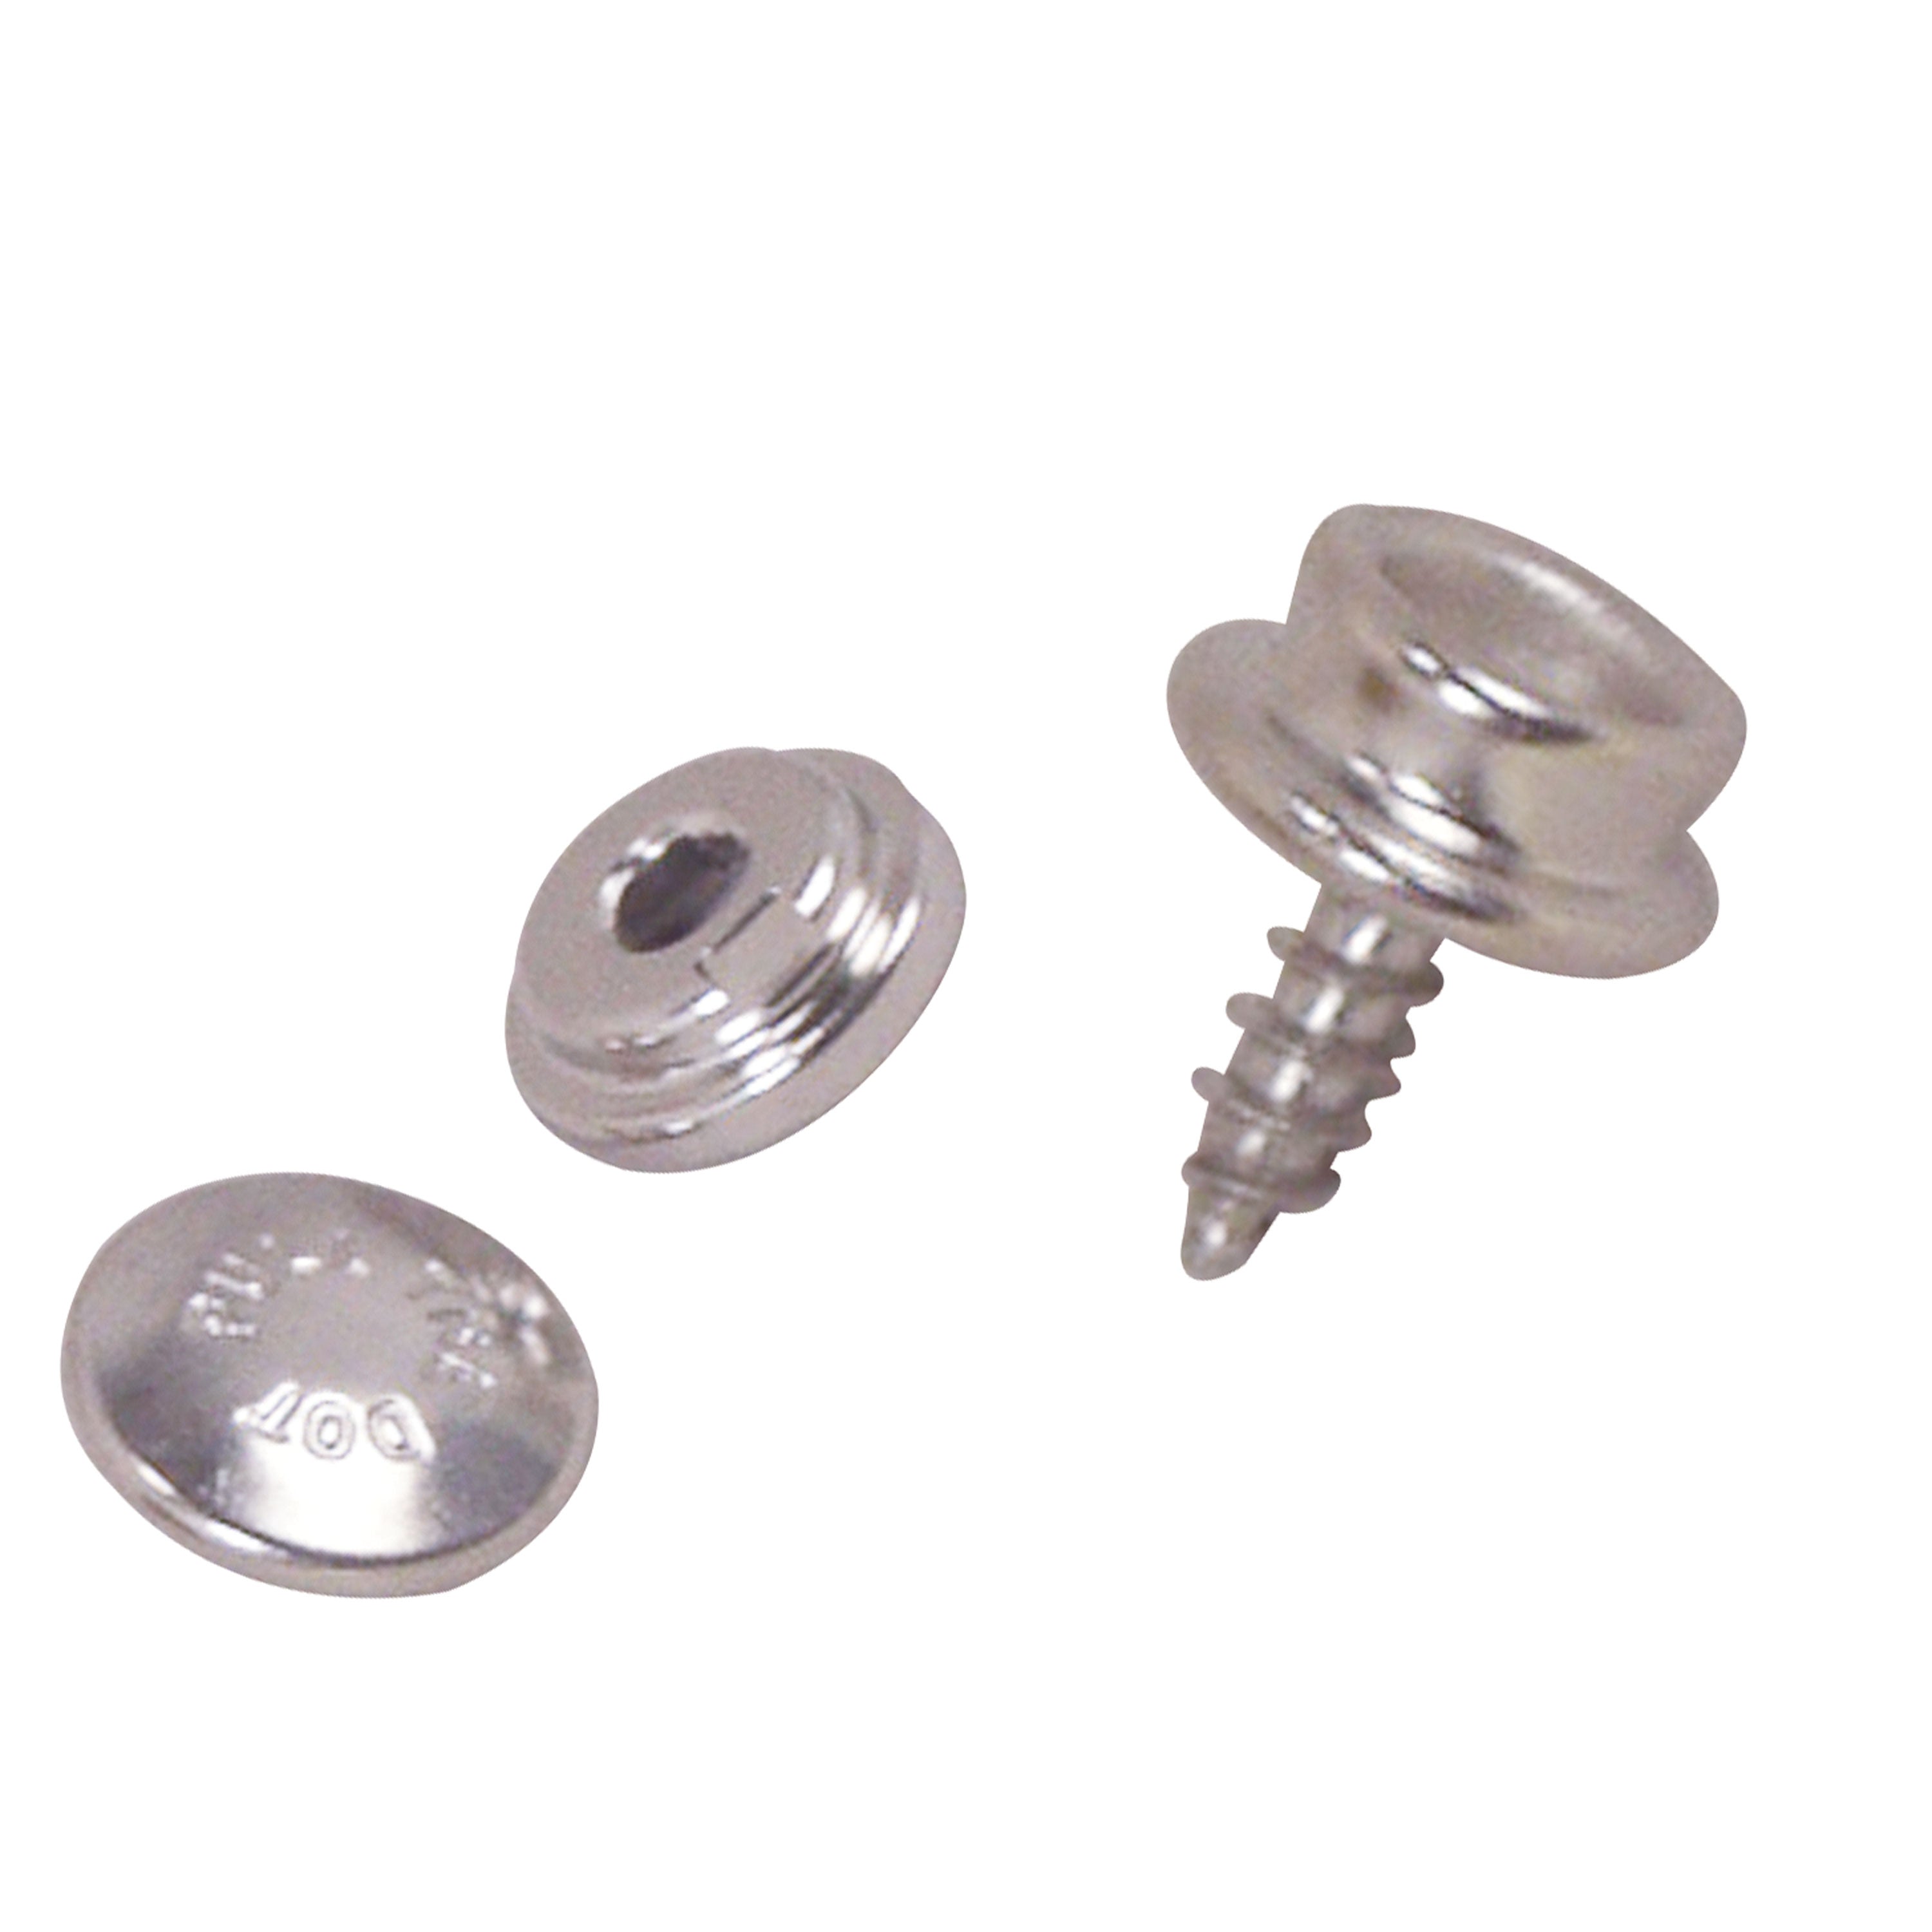 Taylor Made 116402 "One-Way" Snaps on Wood Screw - Male, Pack of 100